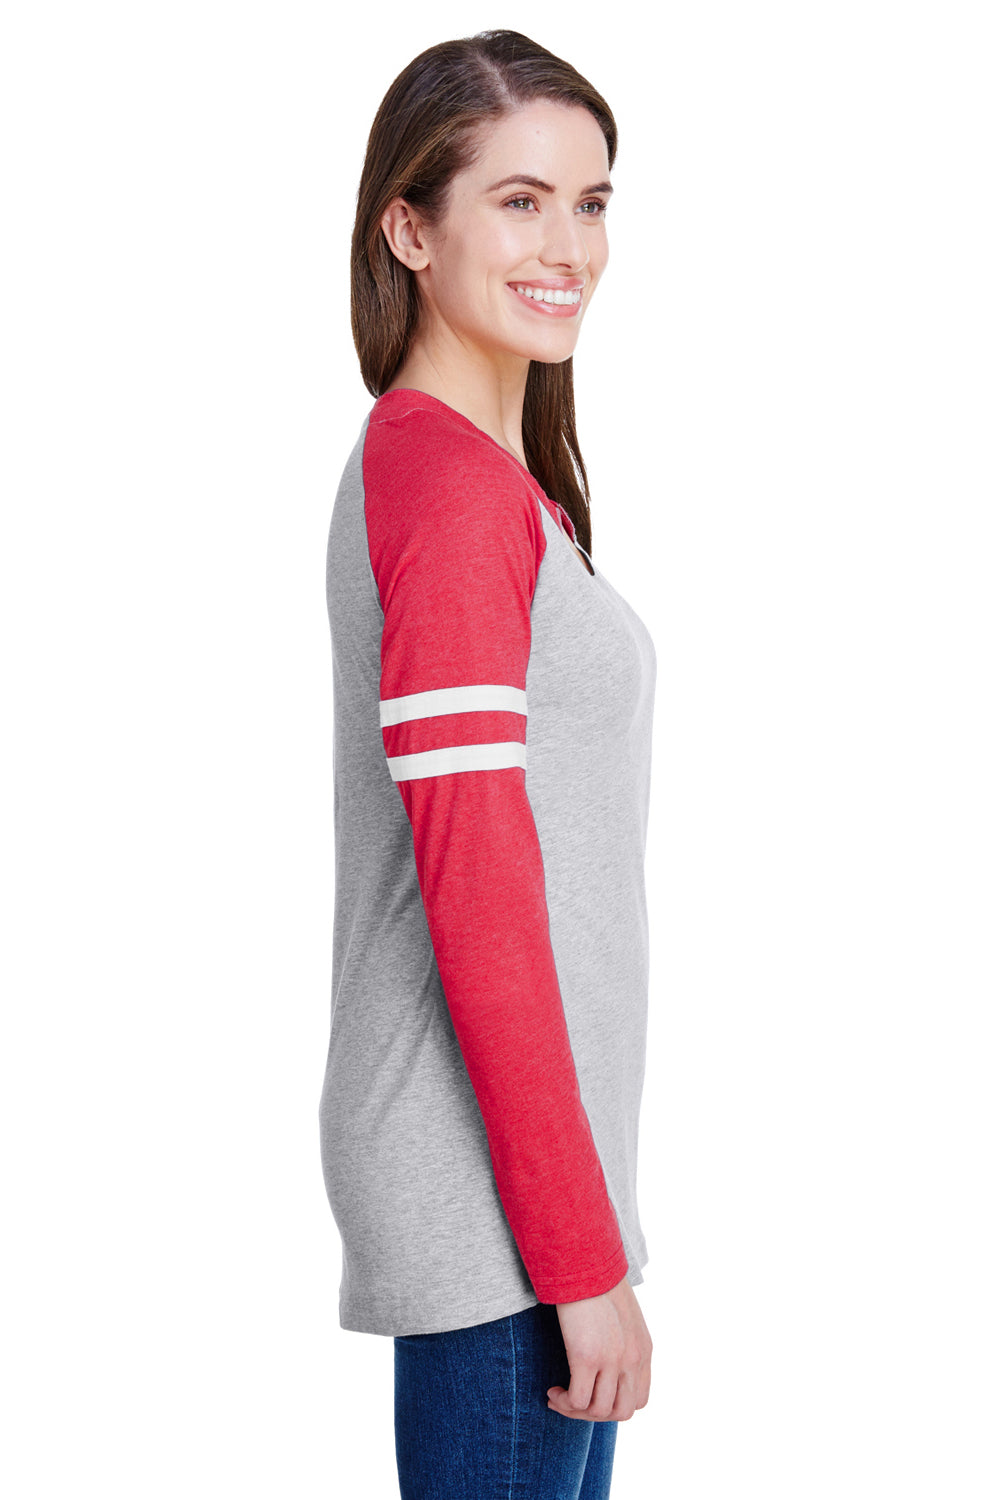 LAT 3534 Womens Gameday Mash Up Fine Jersey Long Sleeve V-Neck T-Shirt Heather Grey/Red Side